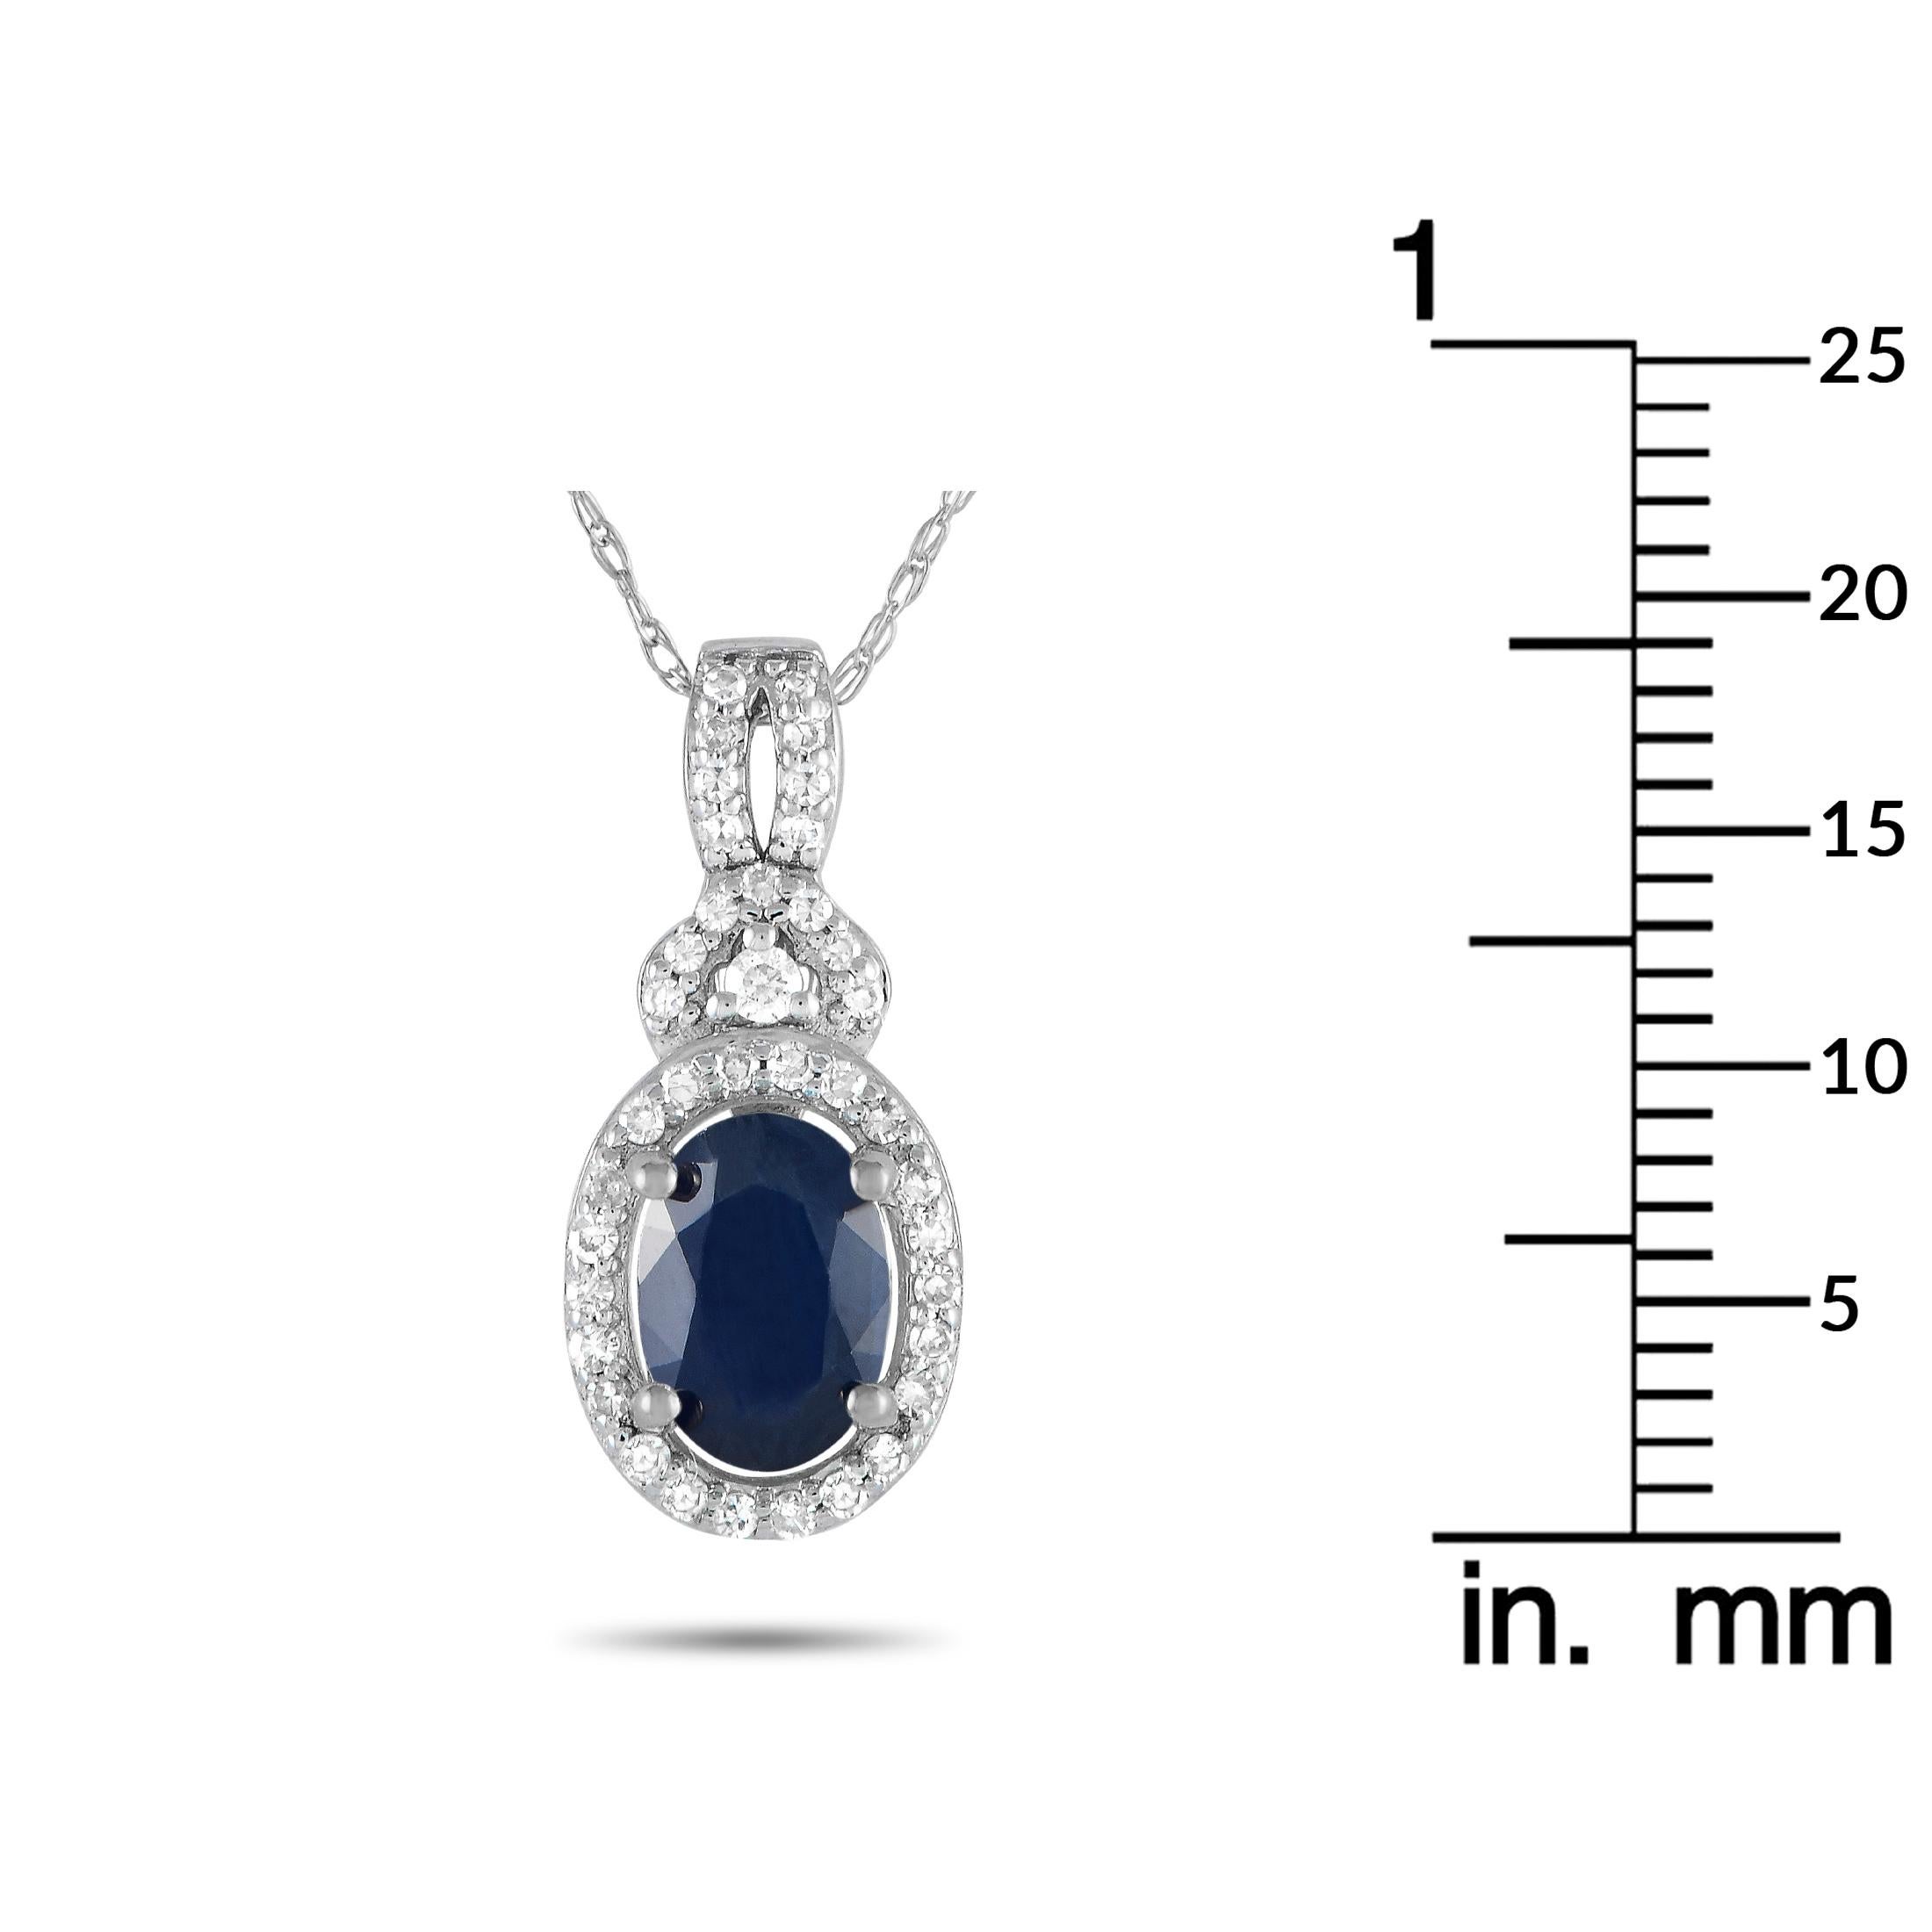 LB Exclusive 14K White Gold 0.15ct Diamond and Sapphire Necklace PD4-15738WSA In New Condition For Sale In Southampton, PA